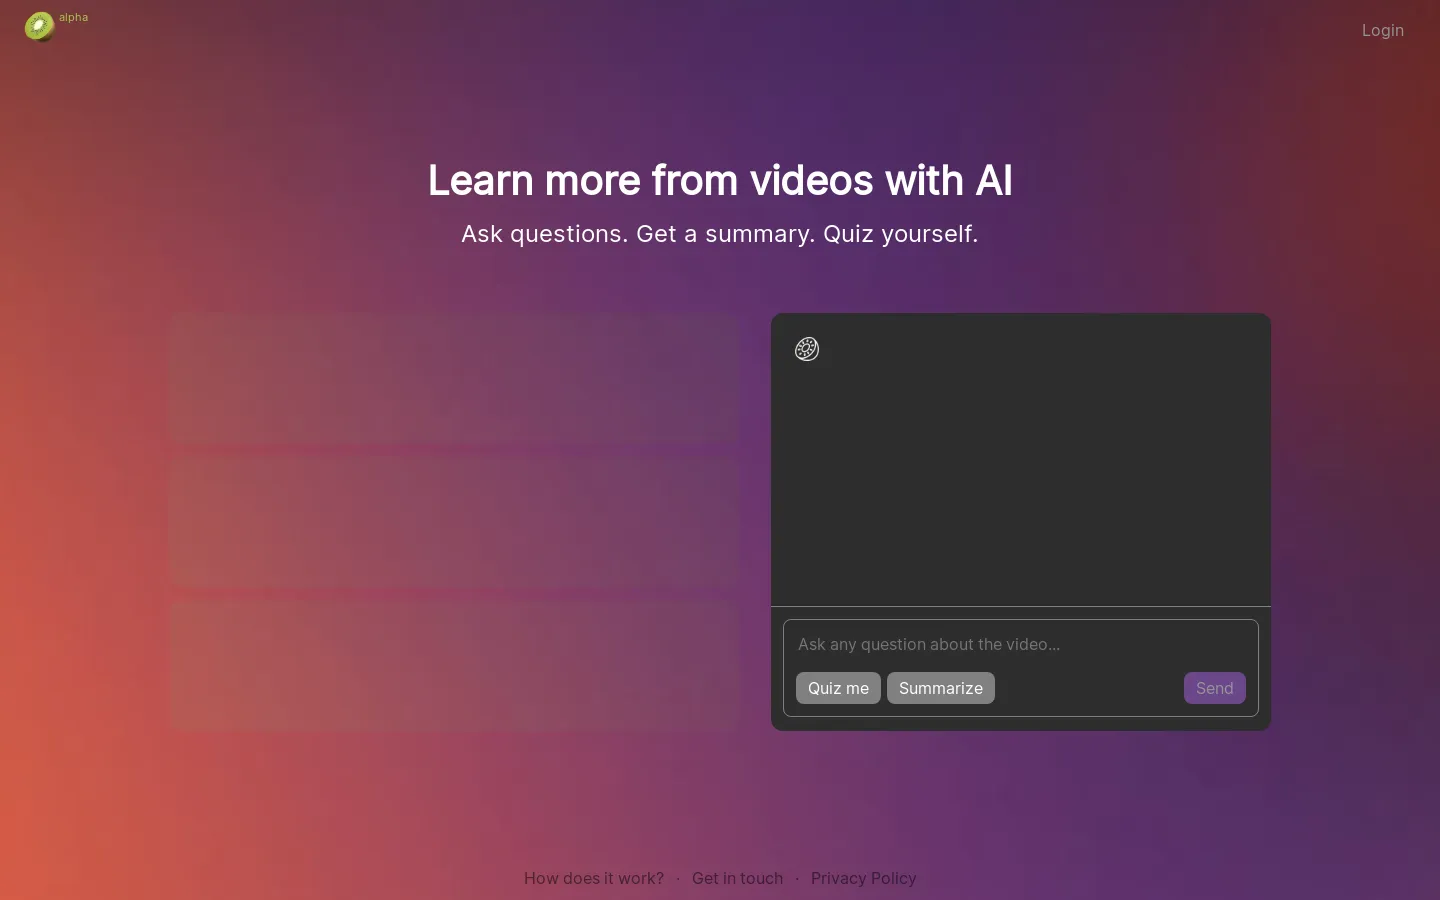 Kiwi Video - Learn from Videos with AI